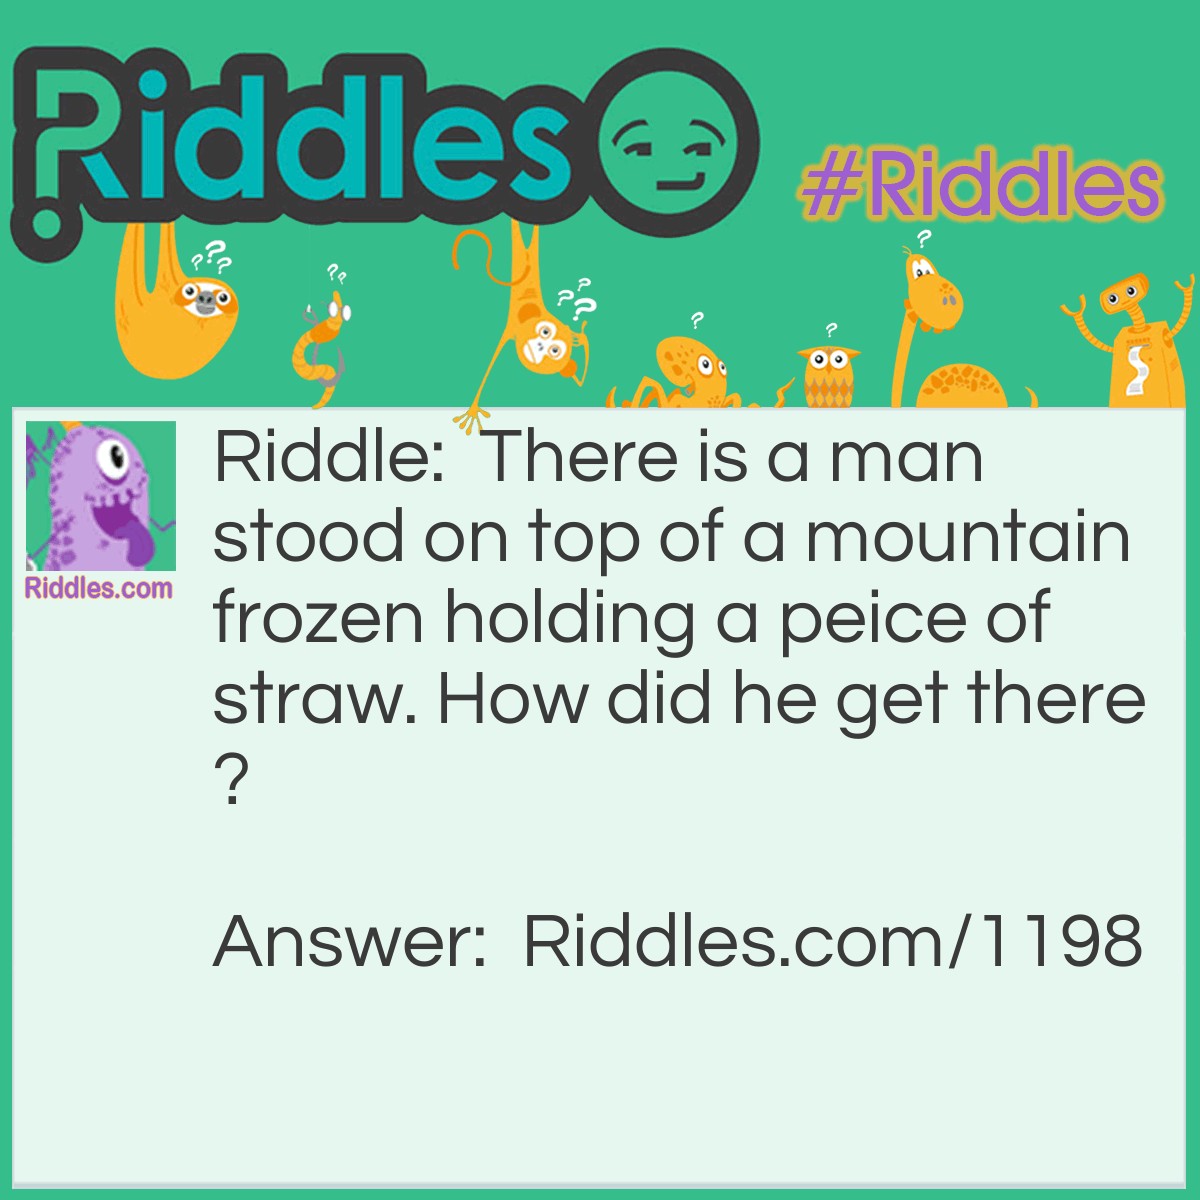 Riddle: There is a man stood on top of a mountain frozen holding a peice of straw. How did he get there? Answer: He was with his friend in a hotair balloon when they were about to hit a mountin so they took of there clothes to make it lighter so they would go higher but it wasnt working so they drew straws and who ever had the shortest straw would have to jump out so he was the one who picked the shortest straw.